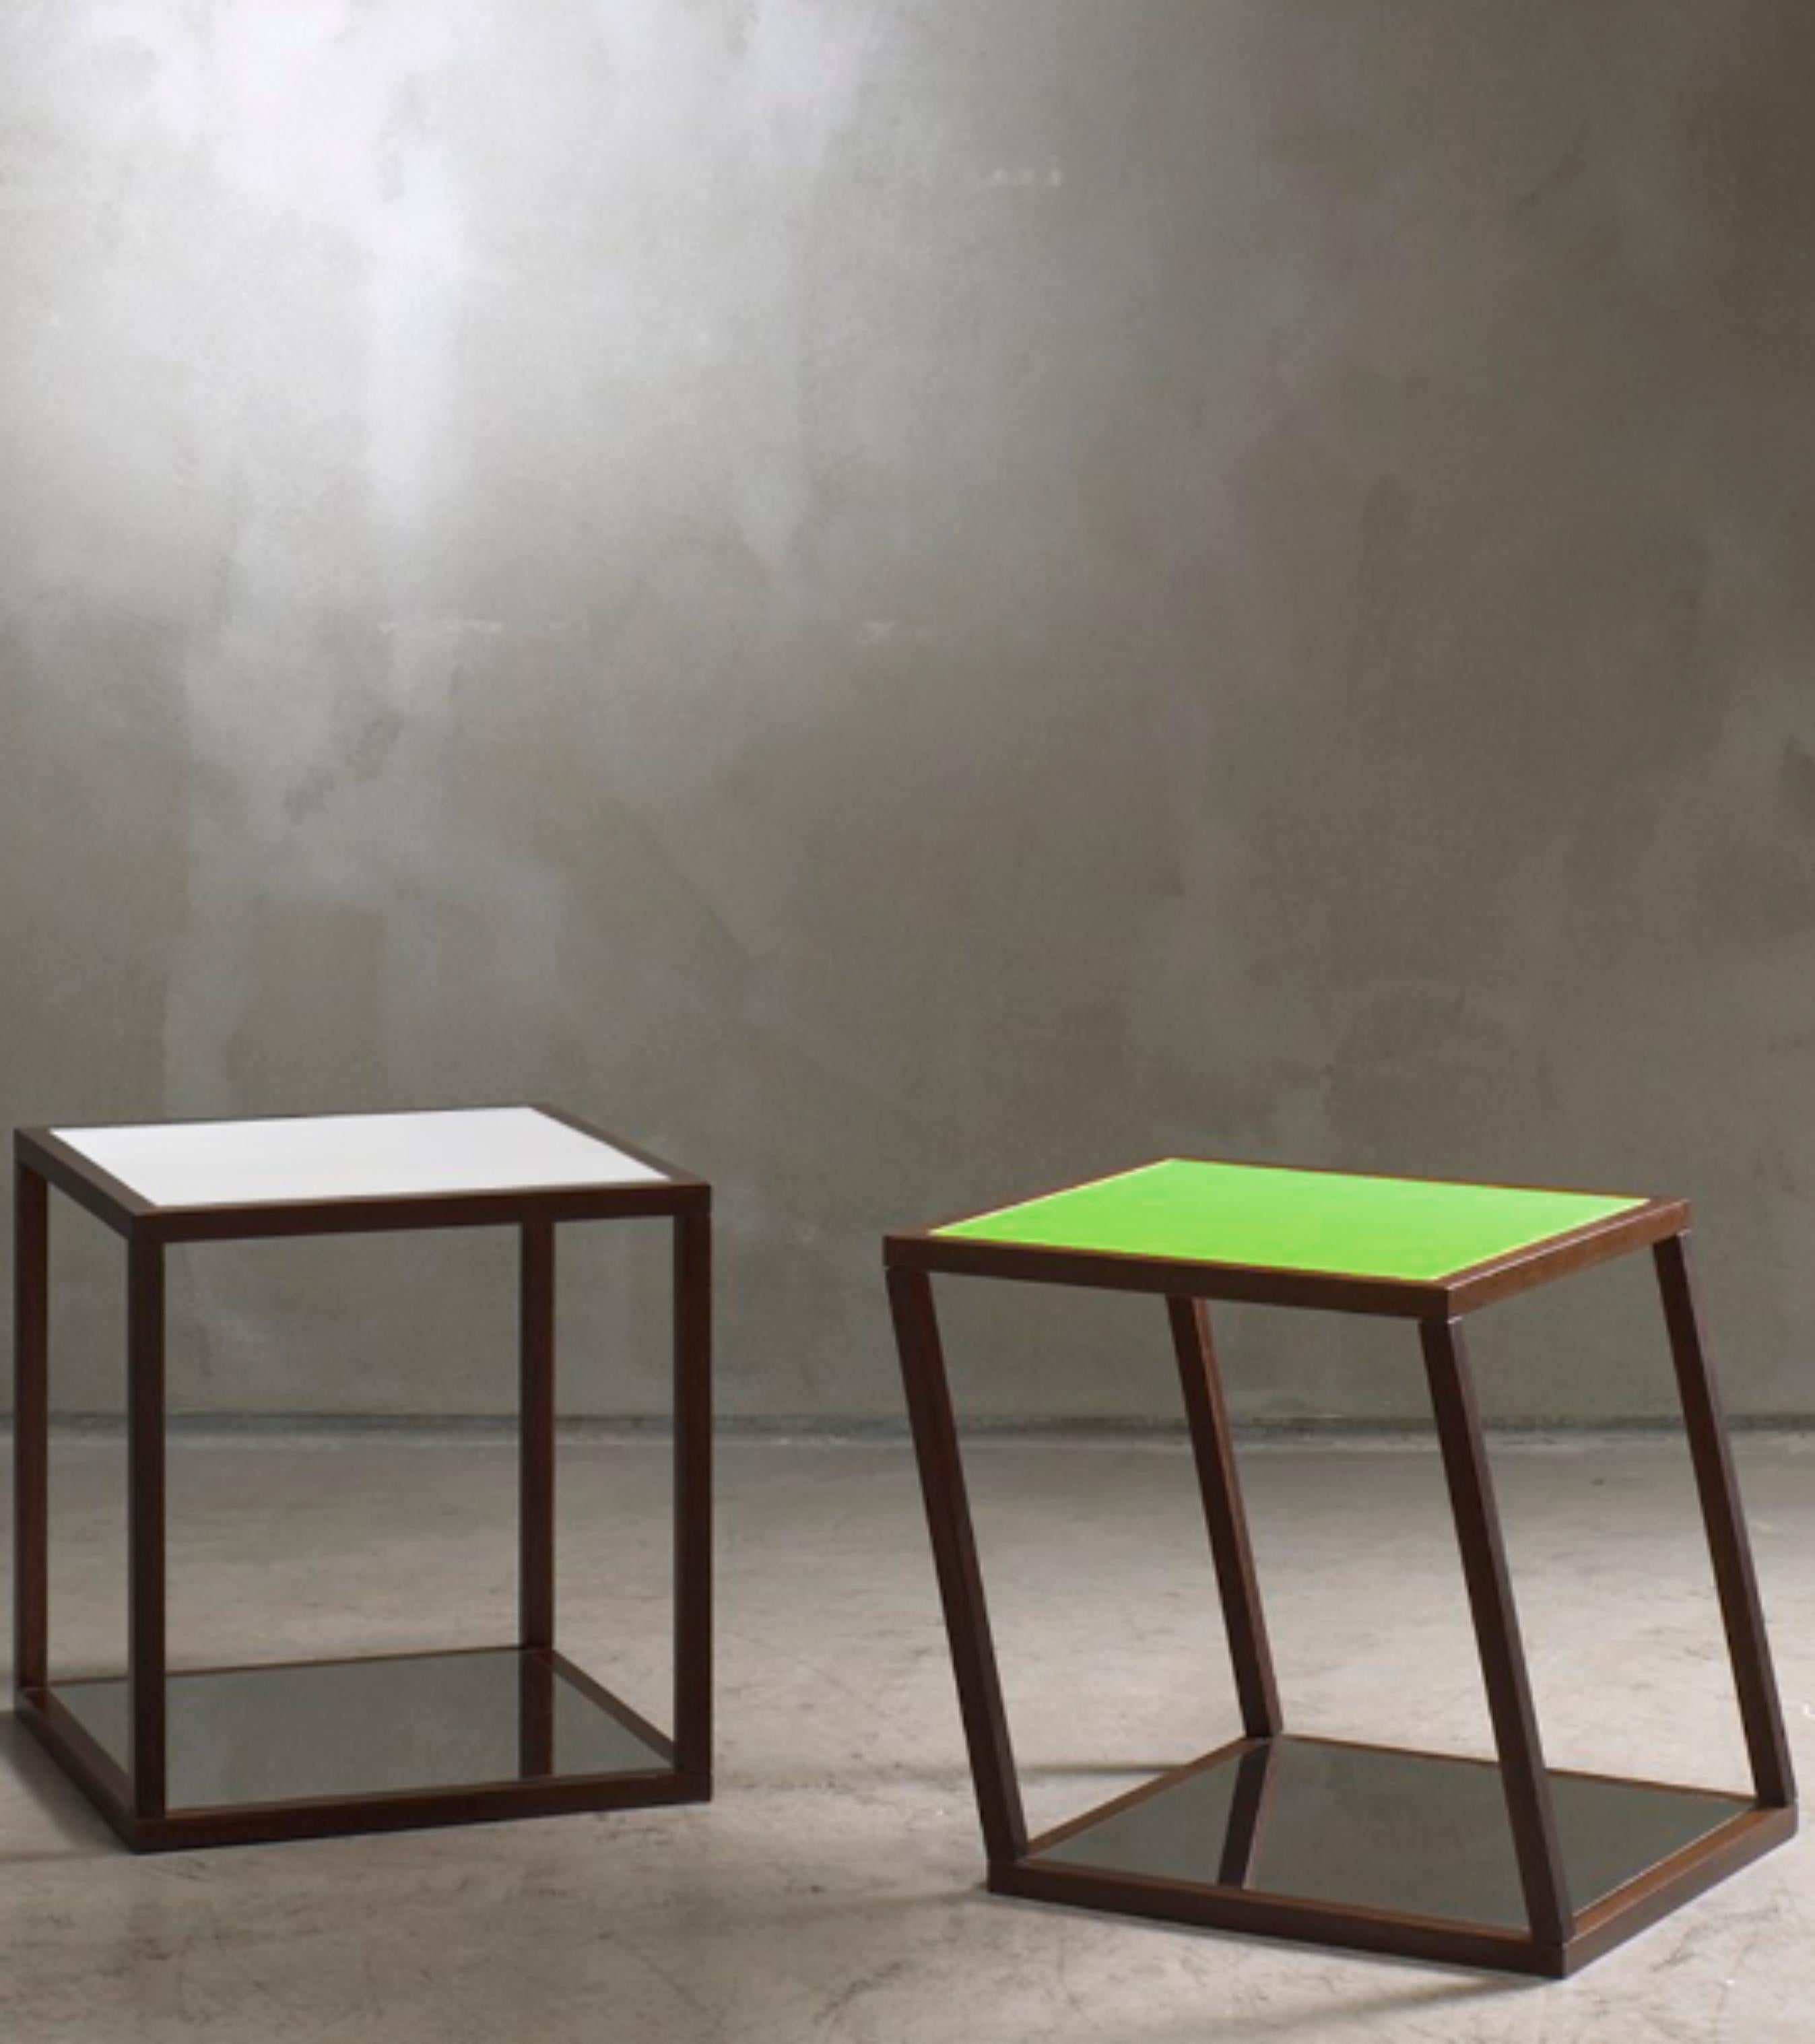 Set Of 2 CF LT07.5 Low Tables by Caturegli Formica
Dimensions: W 38 x D 38 H 40 cm
Materials: Wood, Plastic

The top of low tables changes its colour according to the point of view.
S-Steel structure available

Biographical notes

Beppe